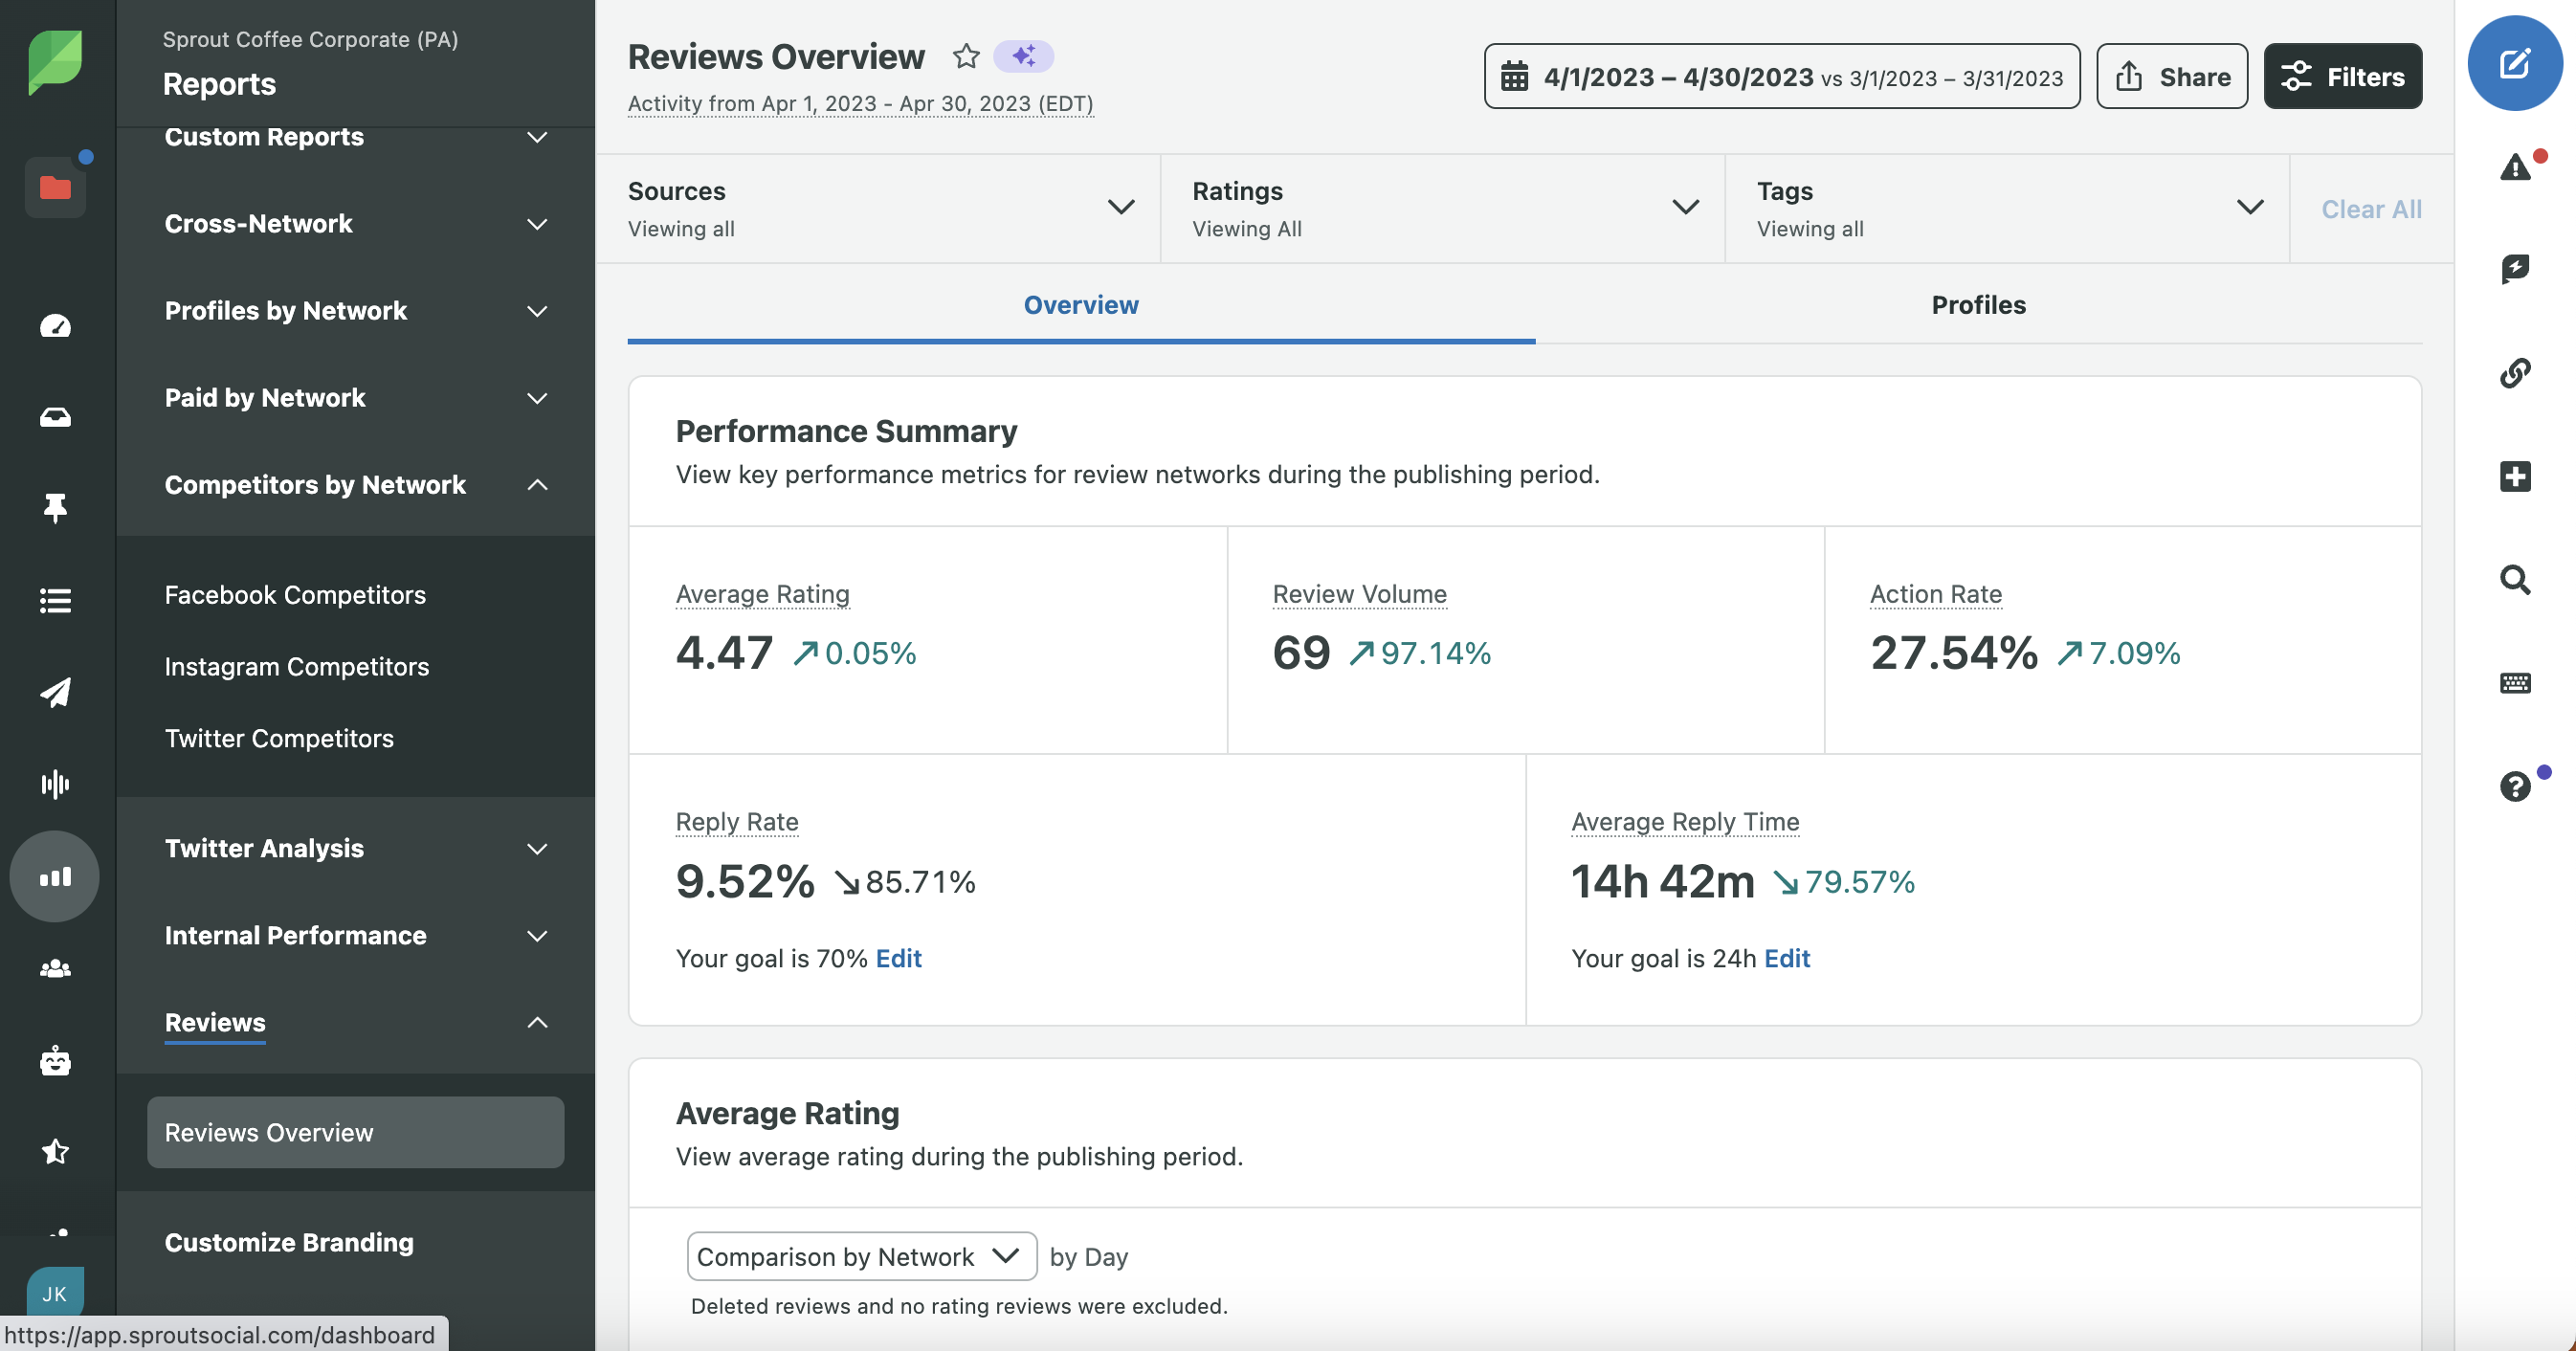 Sprout's Reviews Overview dashboard performance summary featuring various metrics including average rating, review volume, action rate, reply rate and average reply rate. 